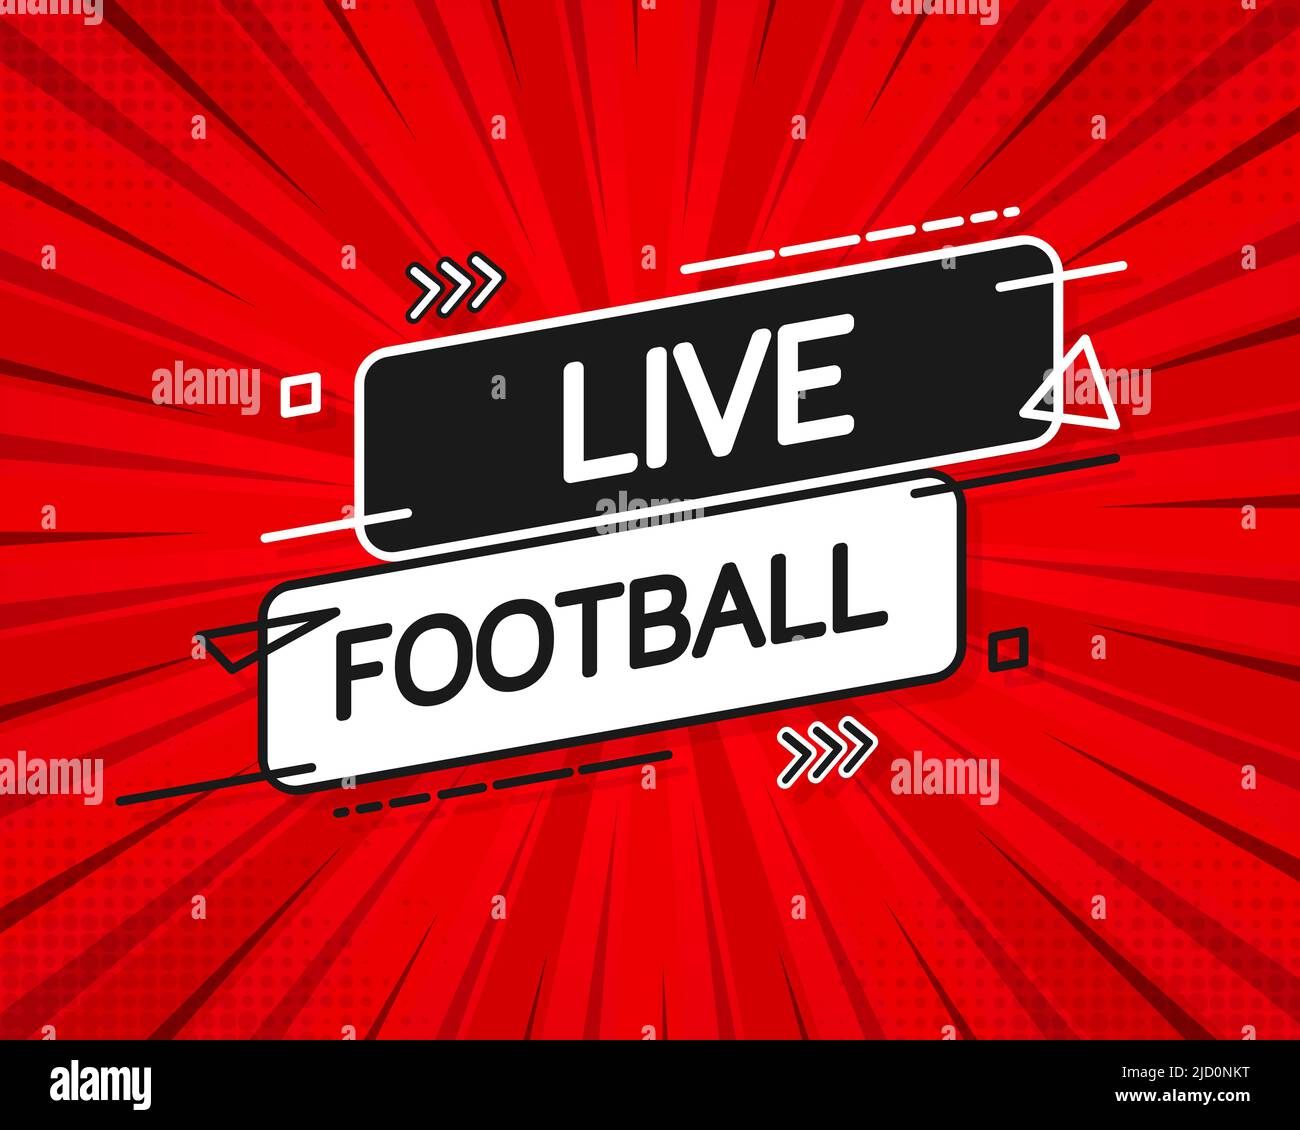 Live Football streaming Icon, Badge, Button for broadcasting or online football stream